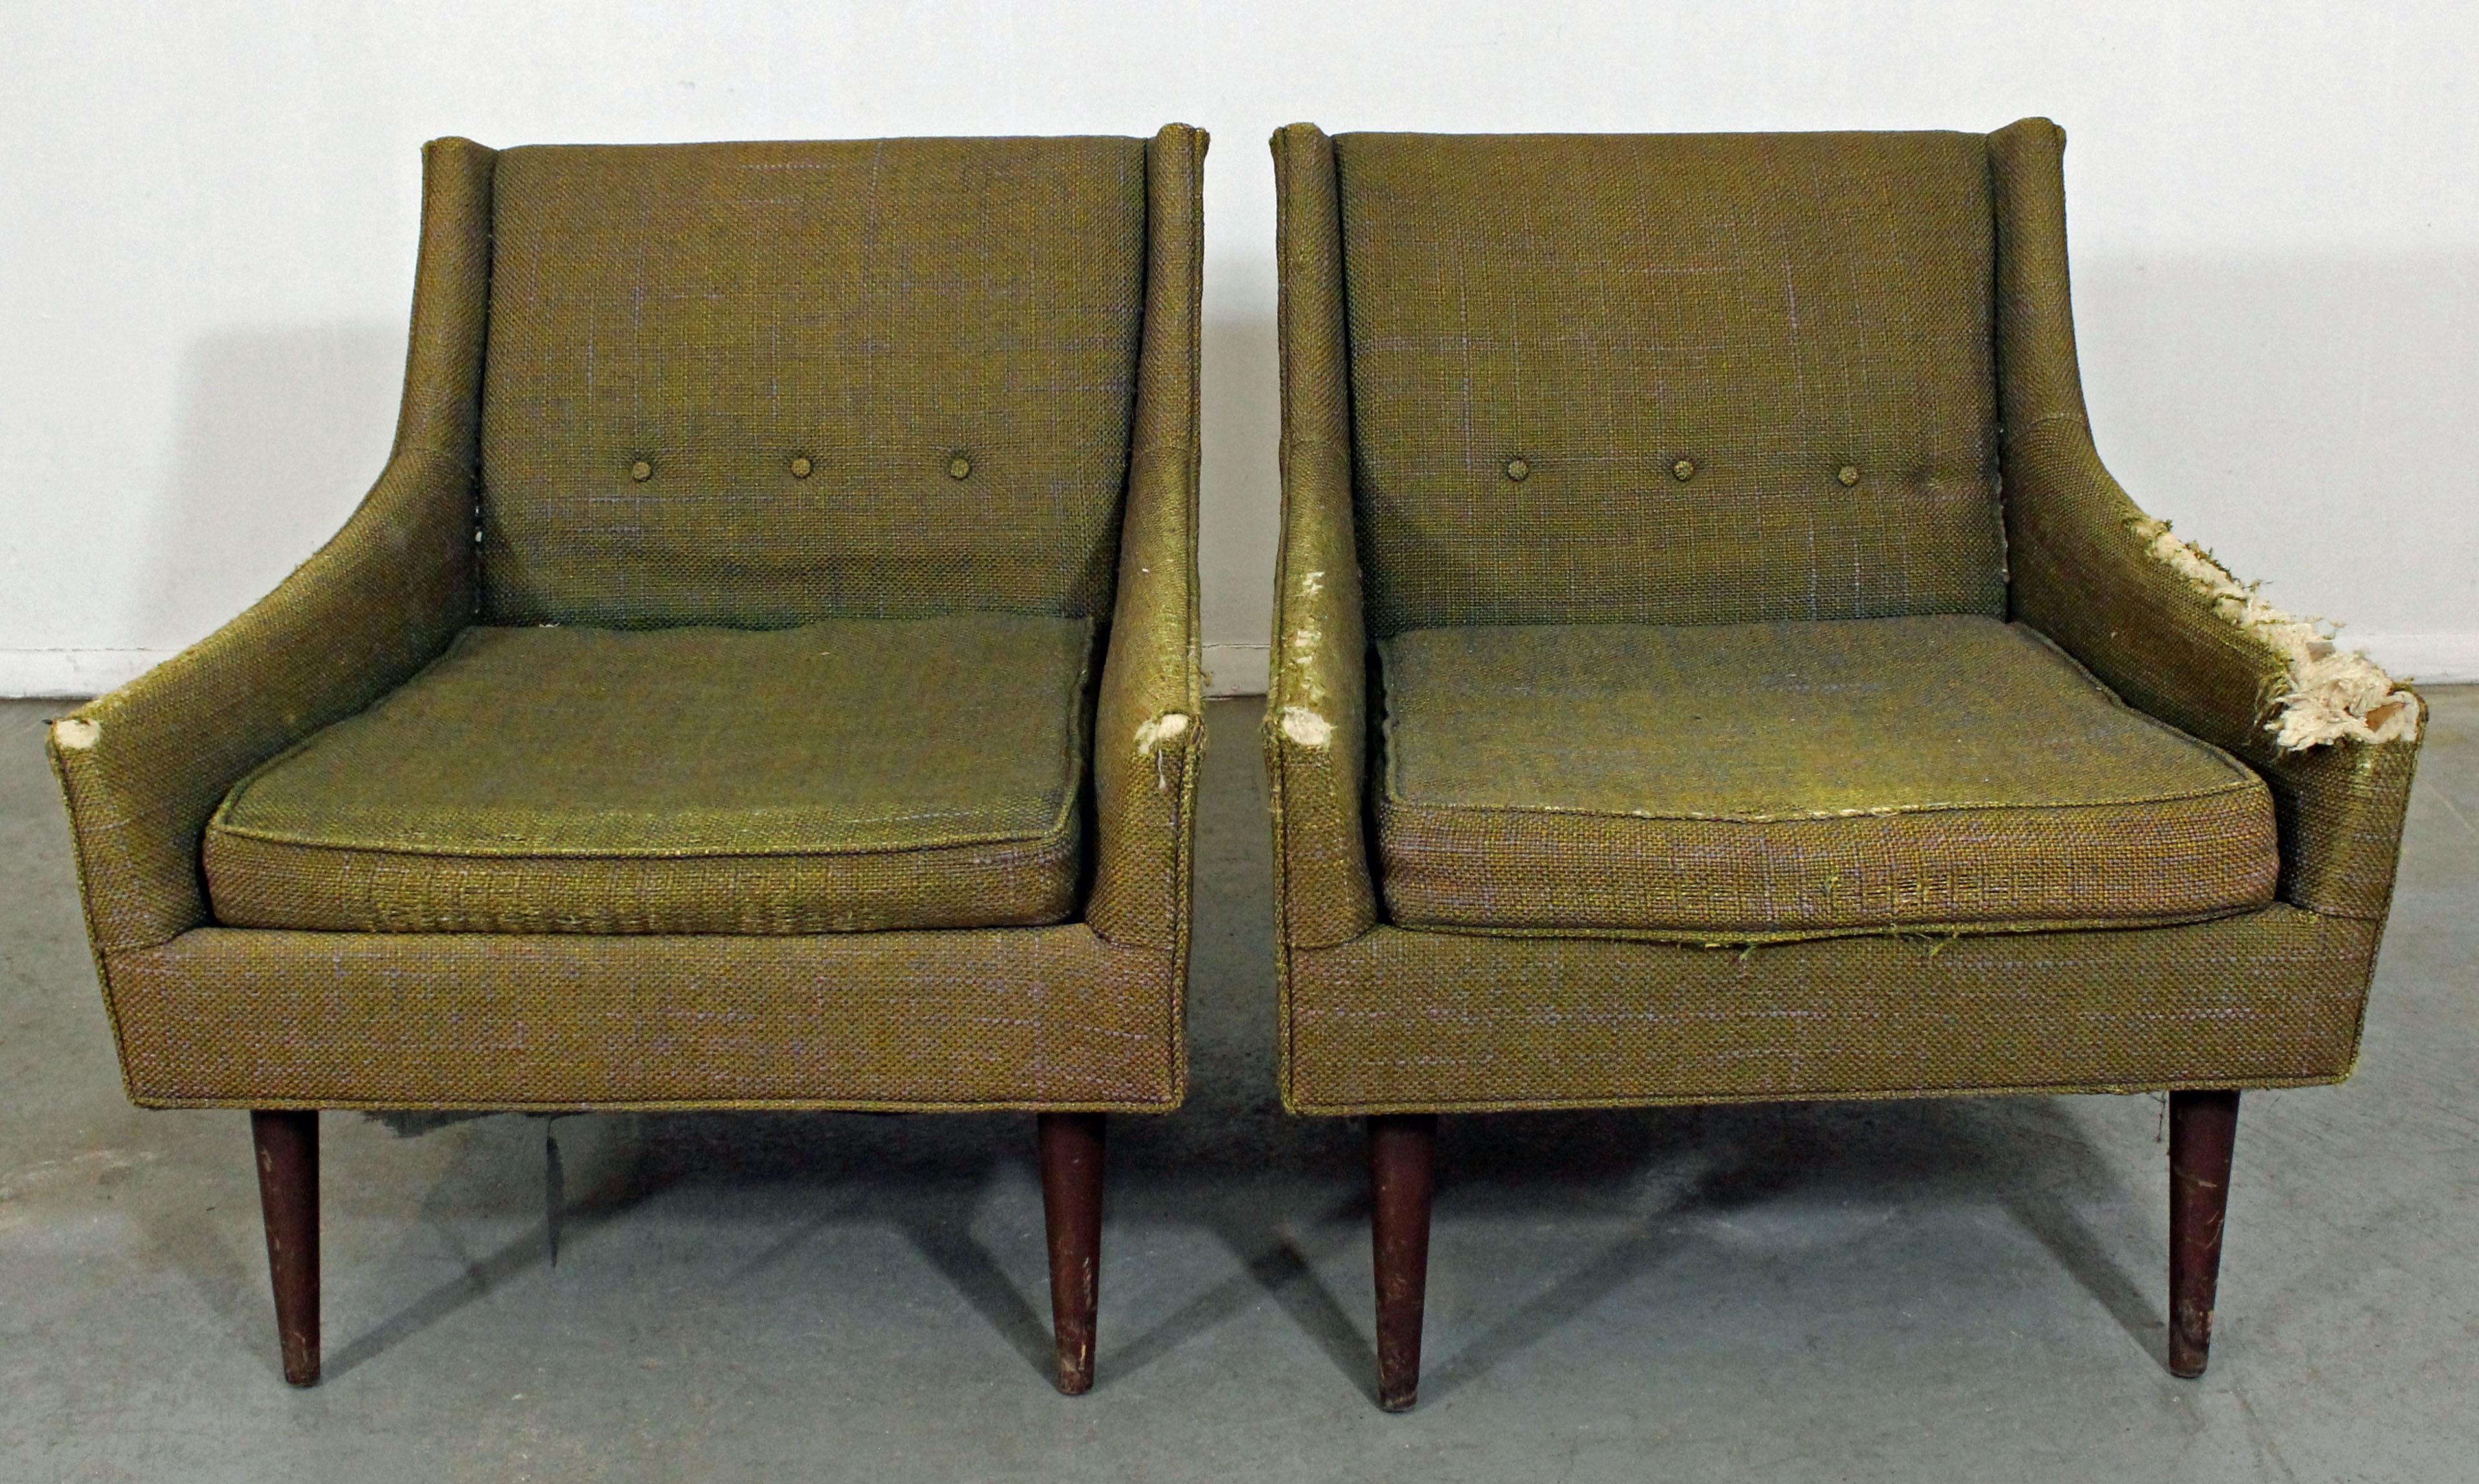 What a find. Offered is a Mid-Century Modern rare pair of club chairs by Selig, attributed to Milo Baughman. This set needs to be reupholstered/restored (see pics). They are signed Selig of Monroe. 

Dimensions:
27.5